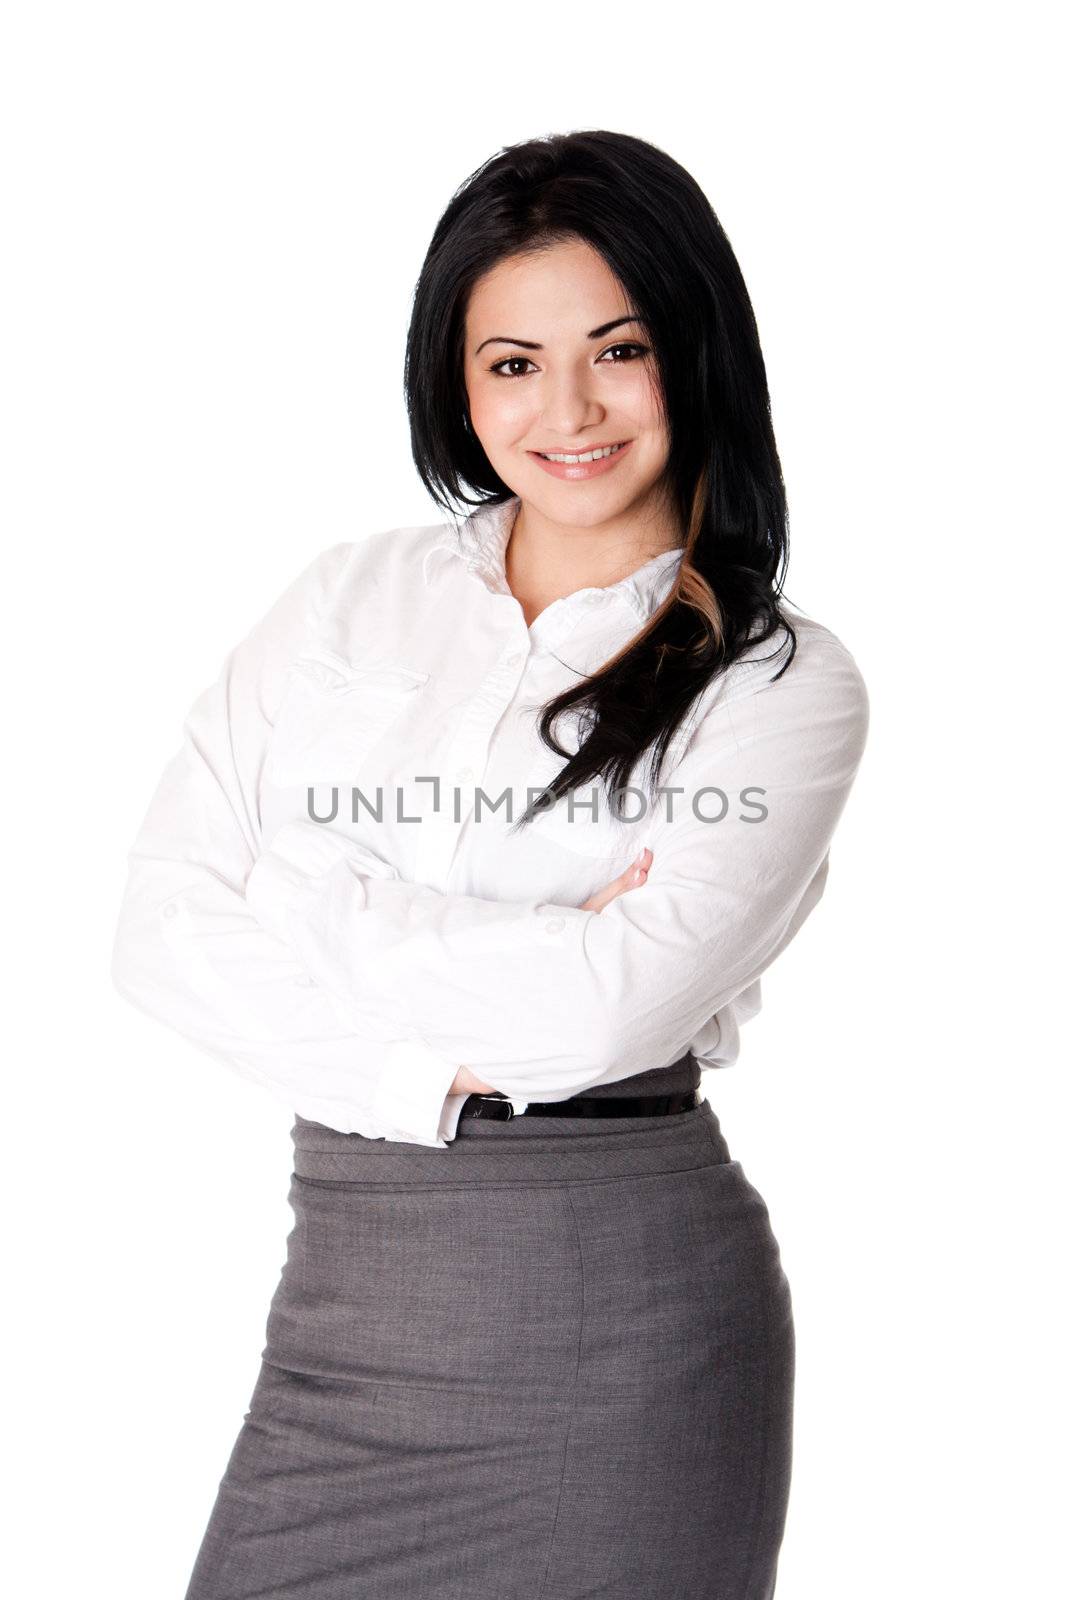 Beautiful happy smiling young corporate business woman MBA student standing with arms crossed wearing white blouse amd grey dress skirt, isolated.